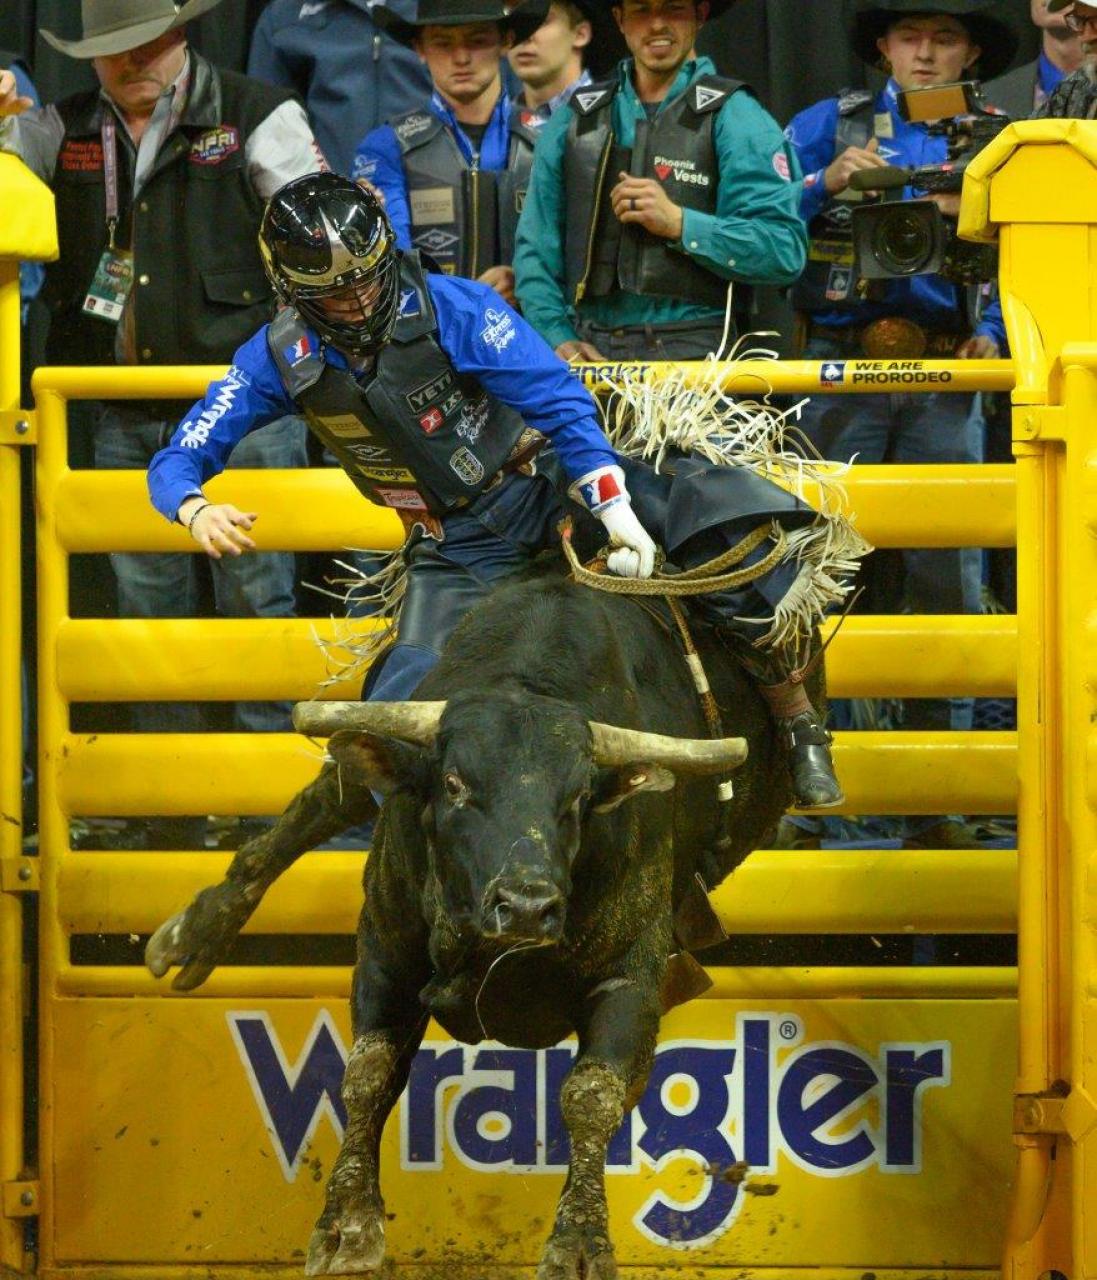 2019 Wrangler NFR Round 4 The Official NFR Experience